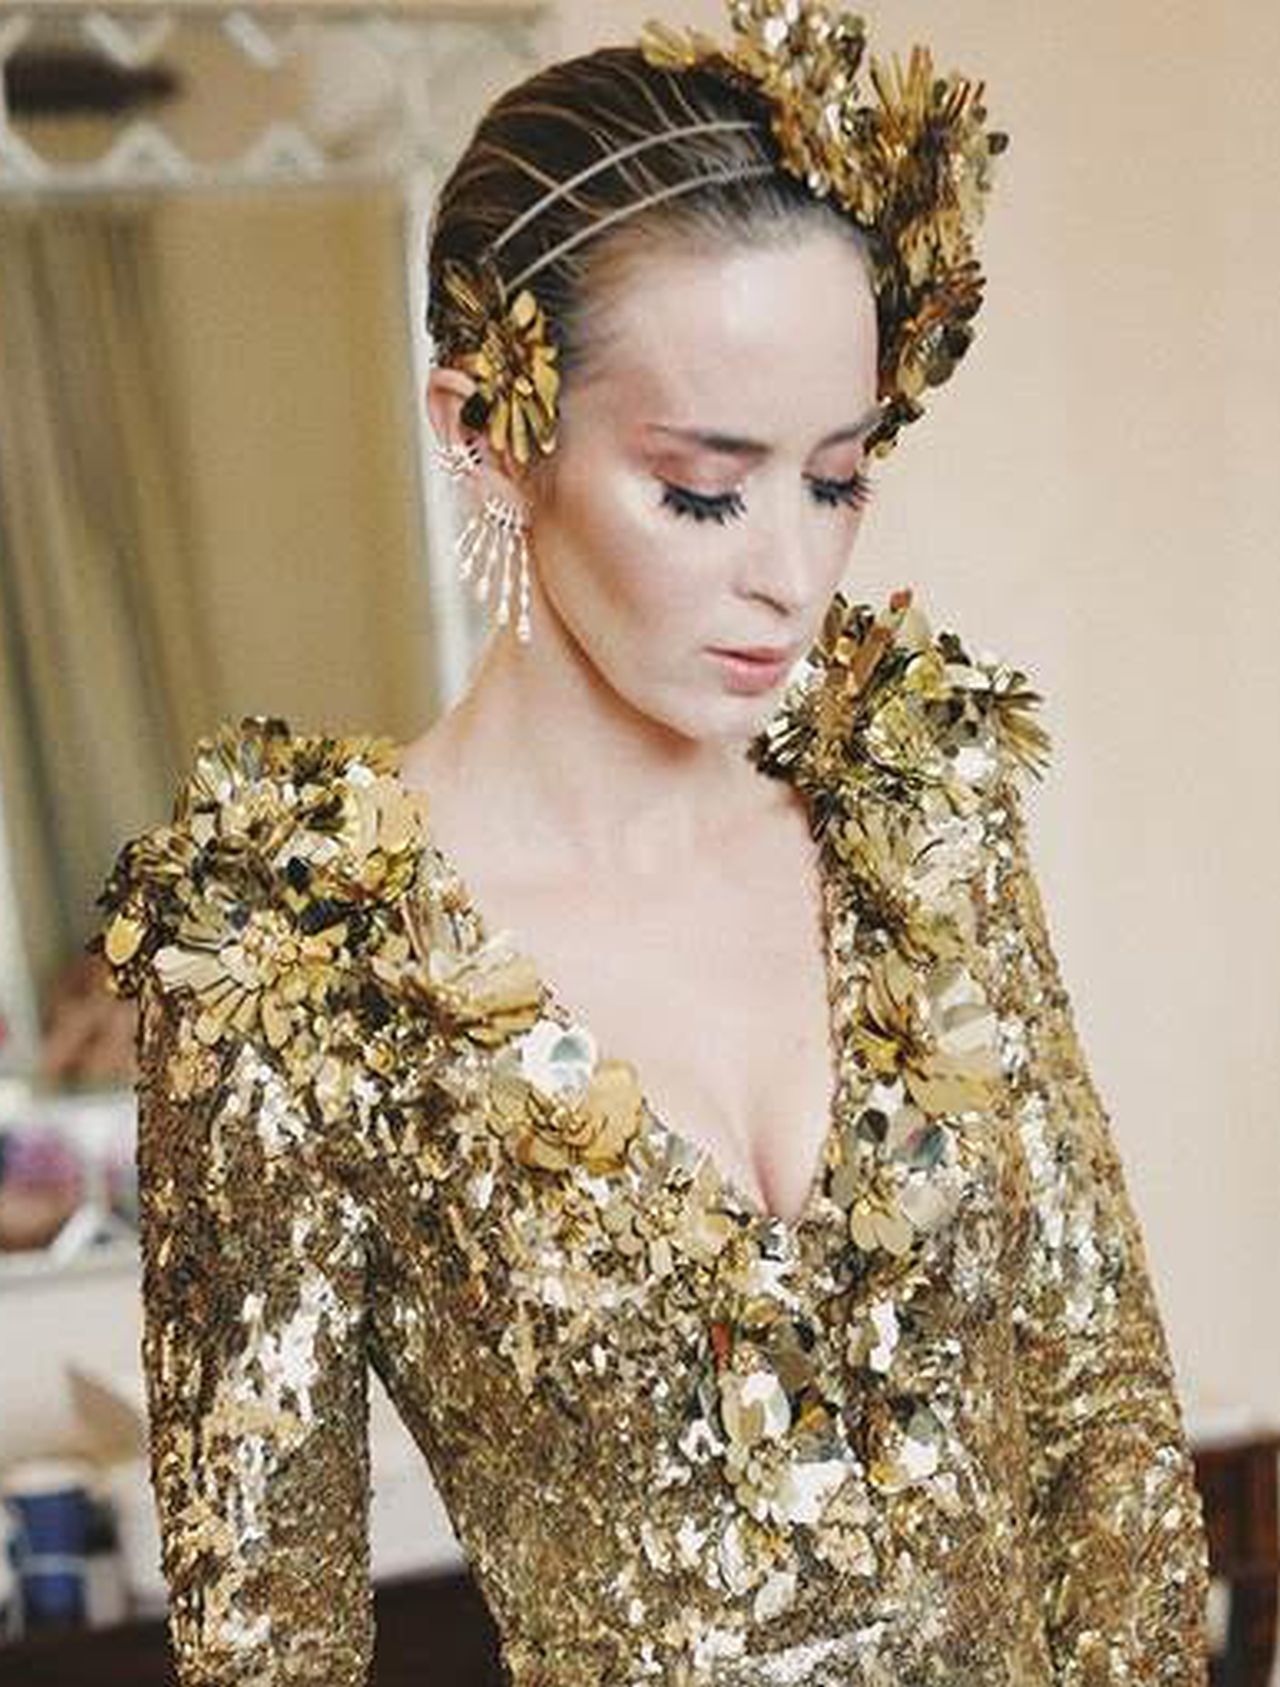 How-To: Emily Blunt's Met Gala Nails